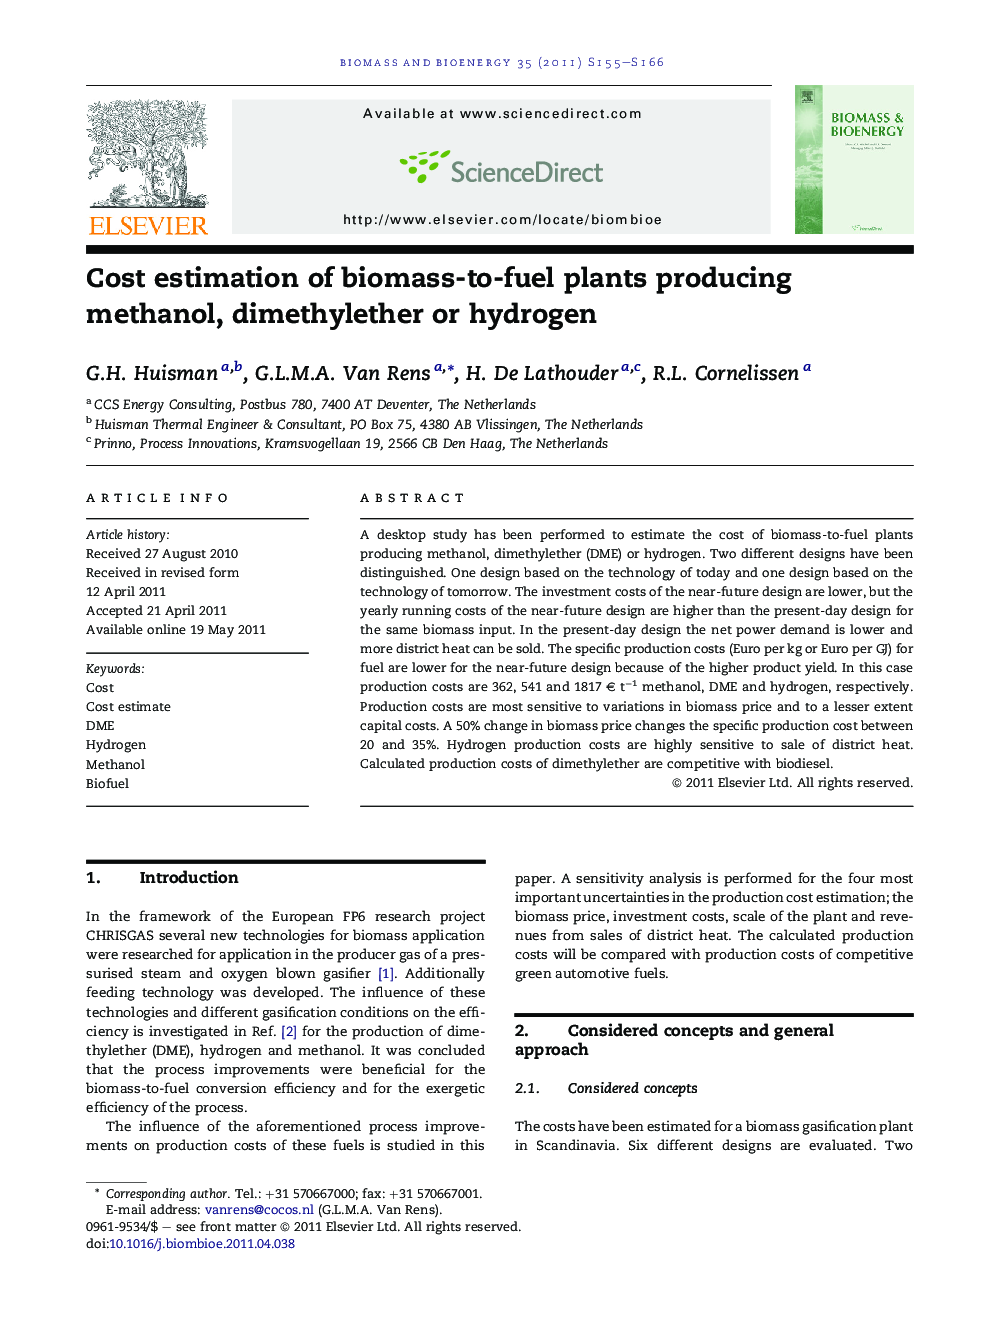 Cost estimation of biomass-to-fuel plants producing methanol, dimethylether or hydrogen